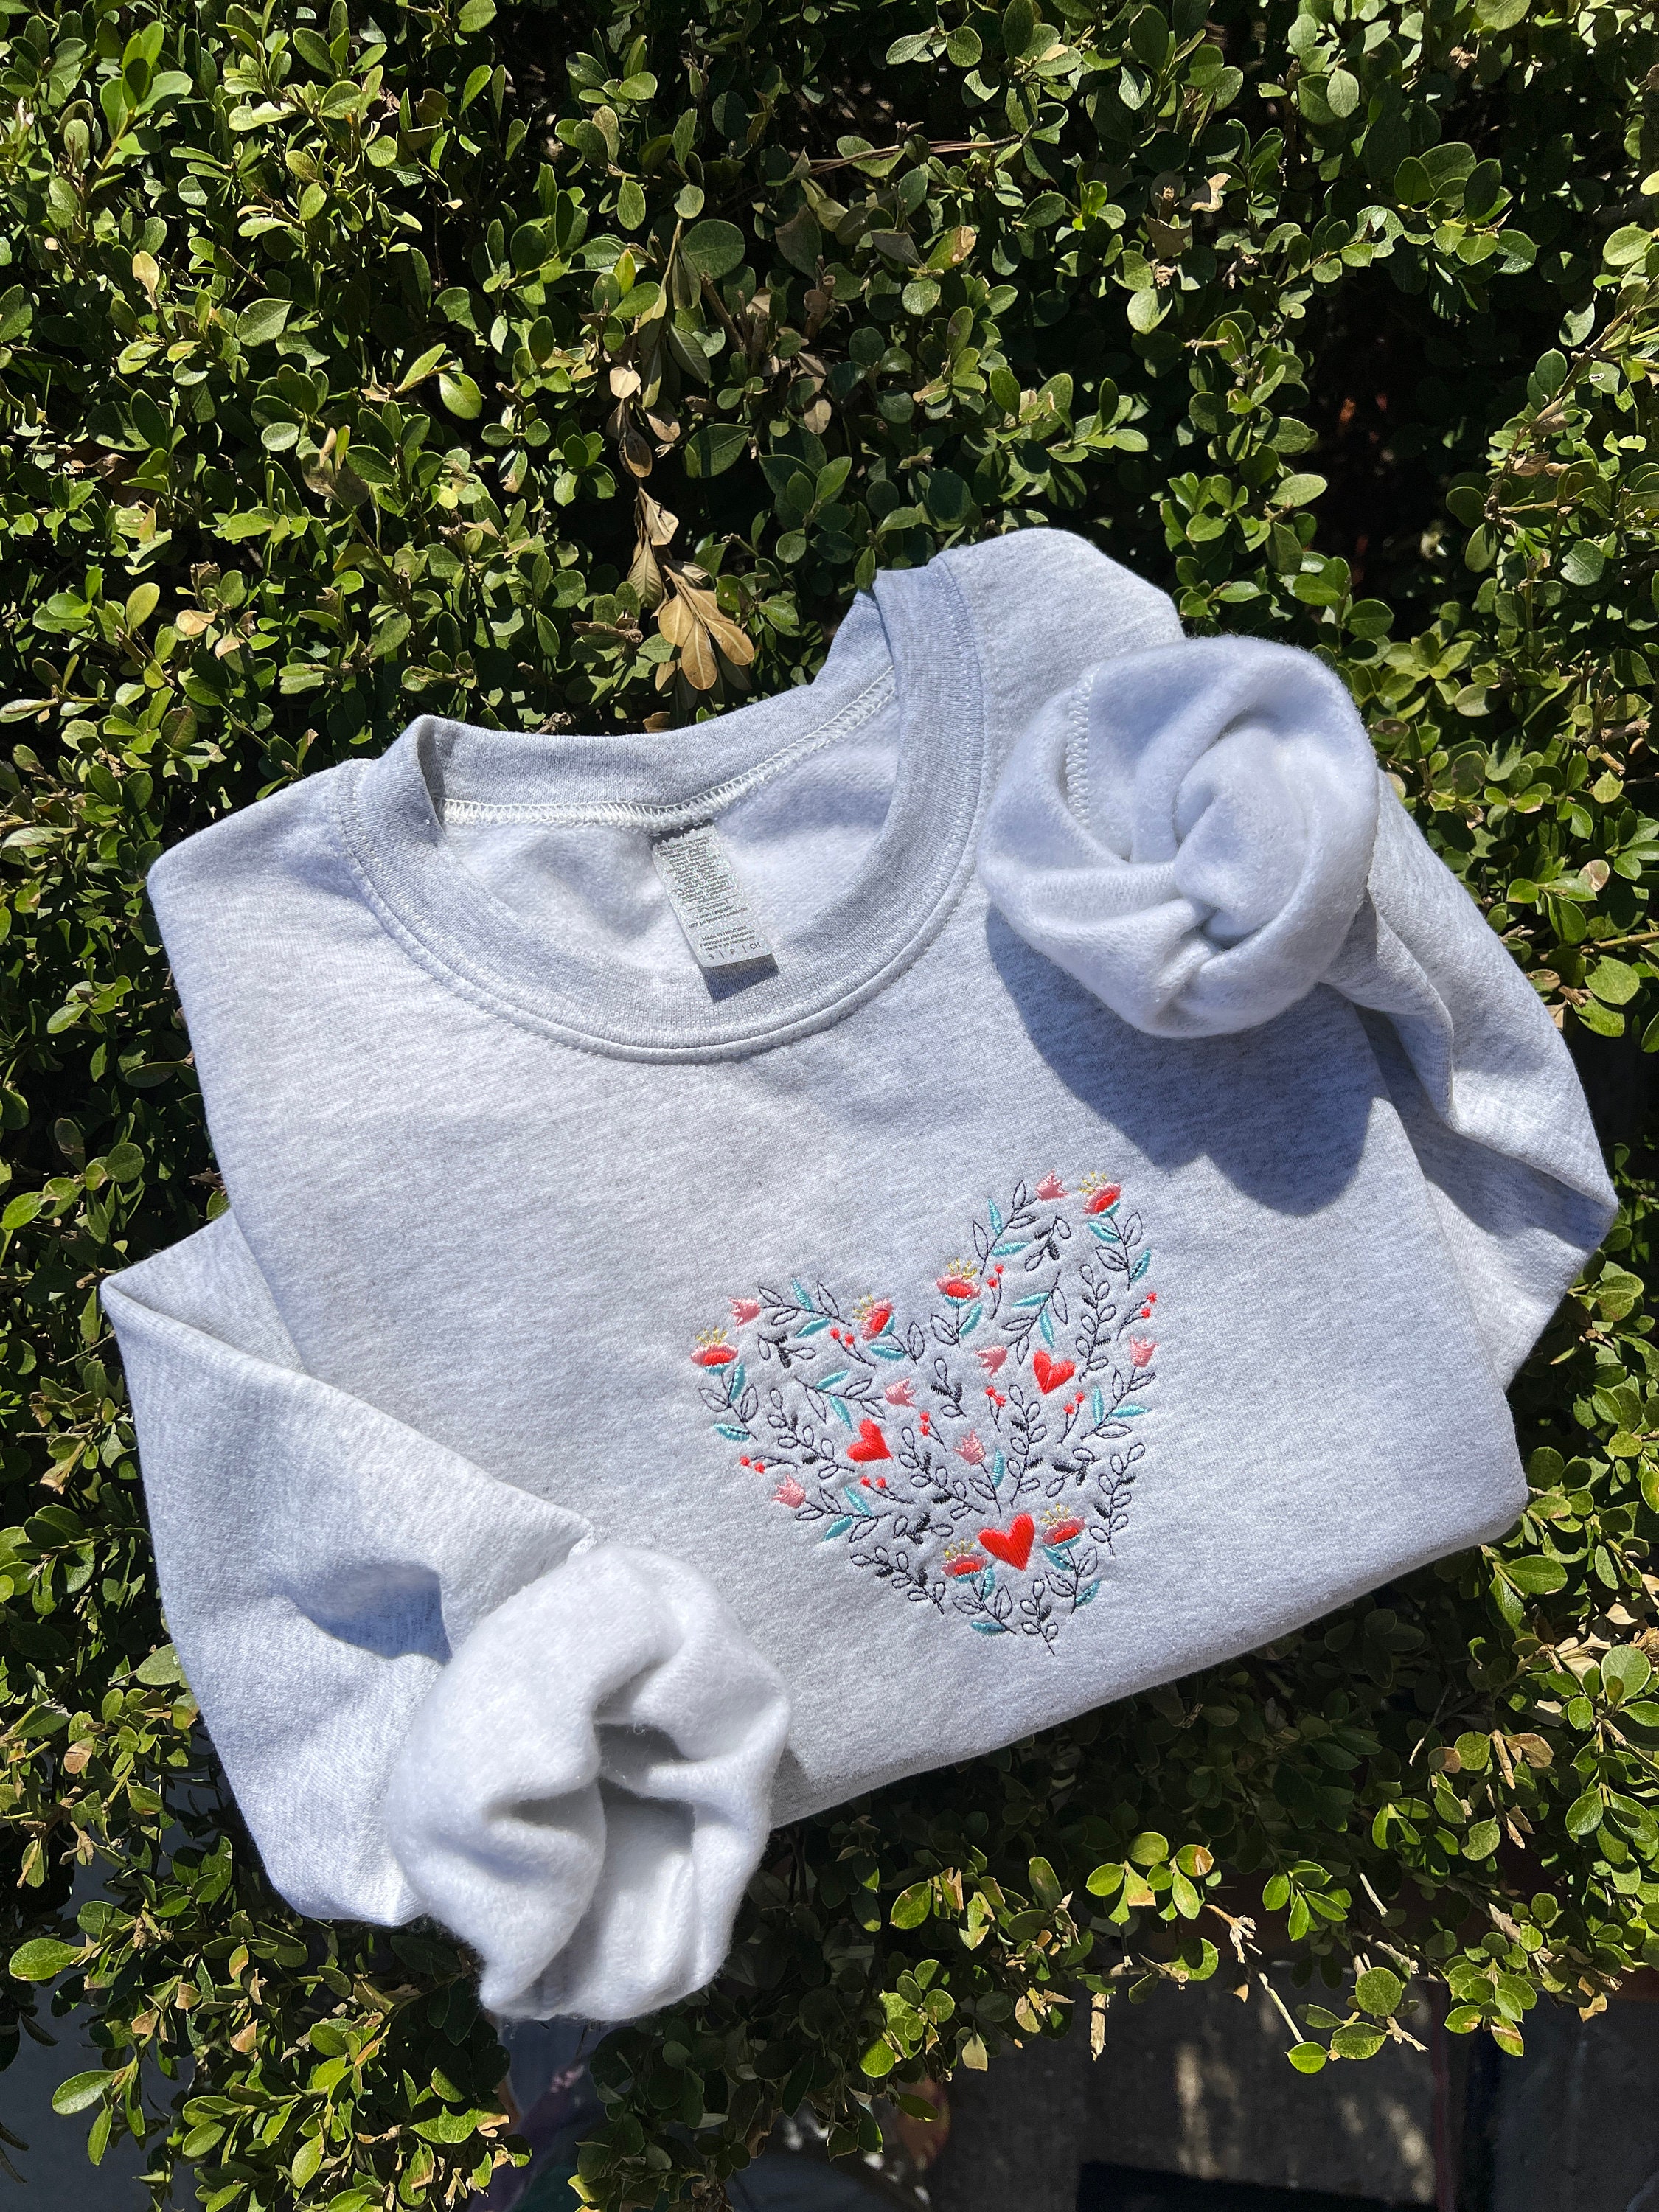 Discover Floral Heart Embroidered Gray Sweatshirt